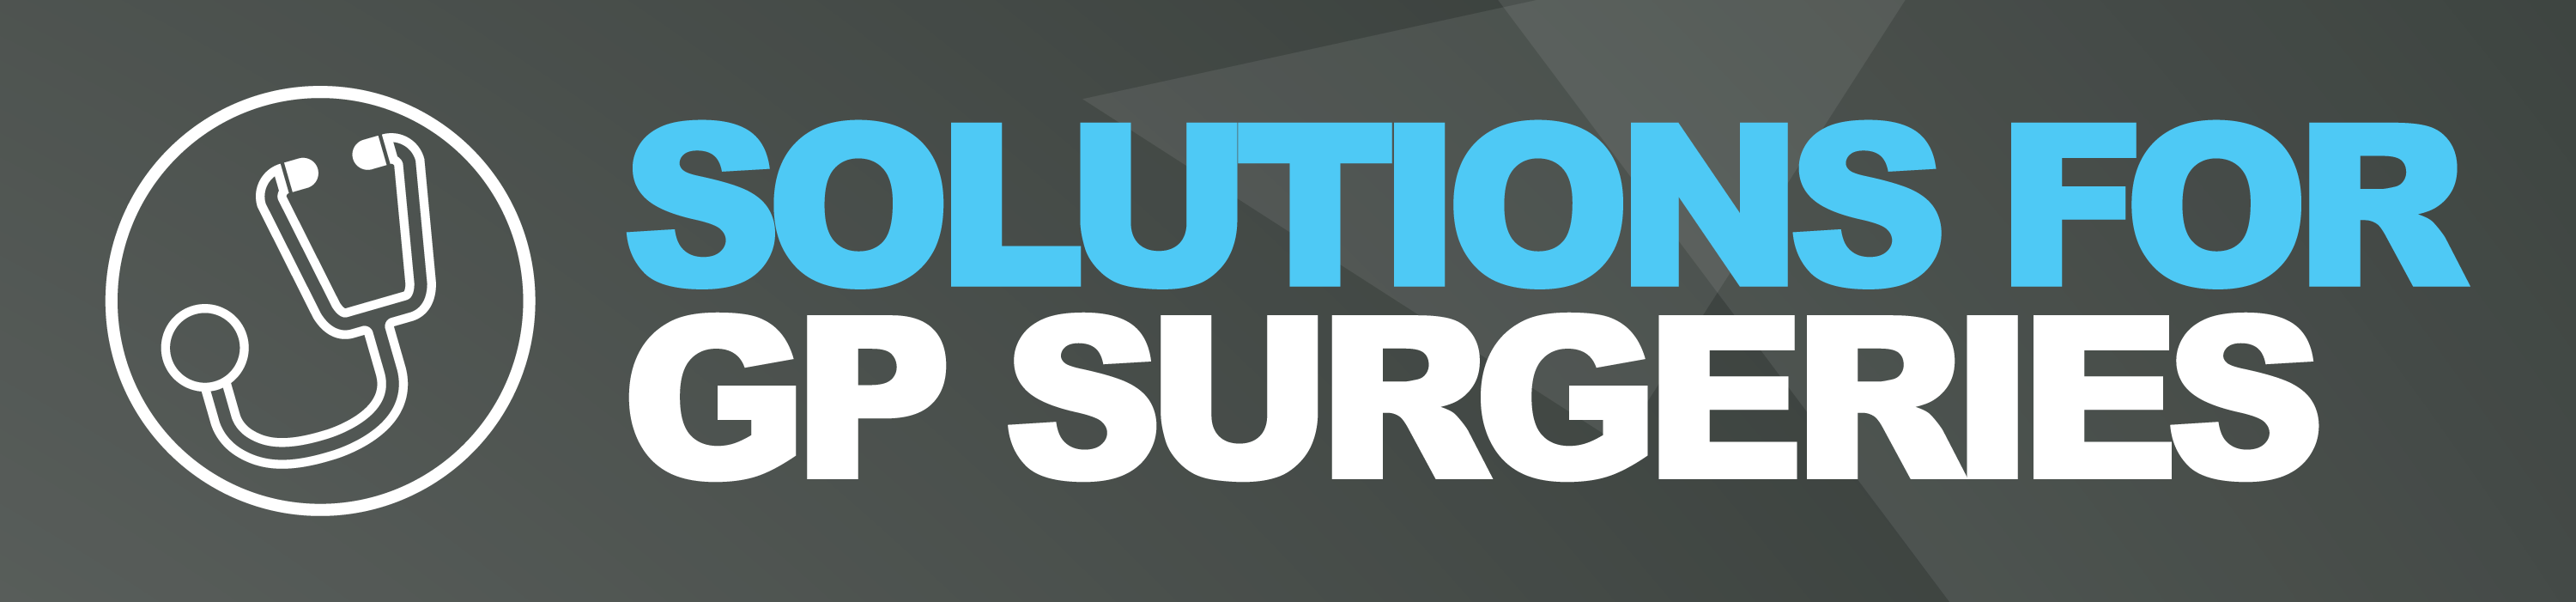 Header image with icon of stethoscope and bearing the title "Solutions for GP Surgeries".